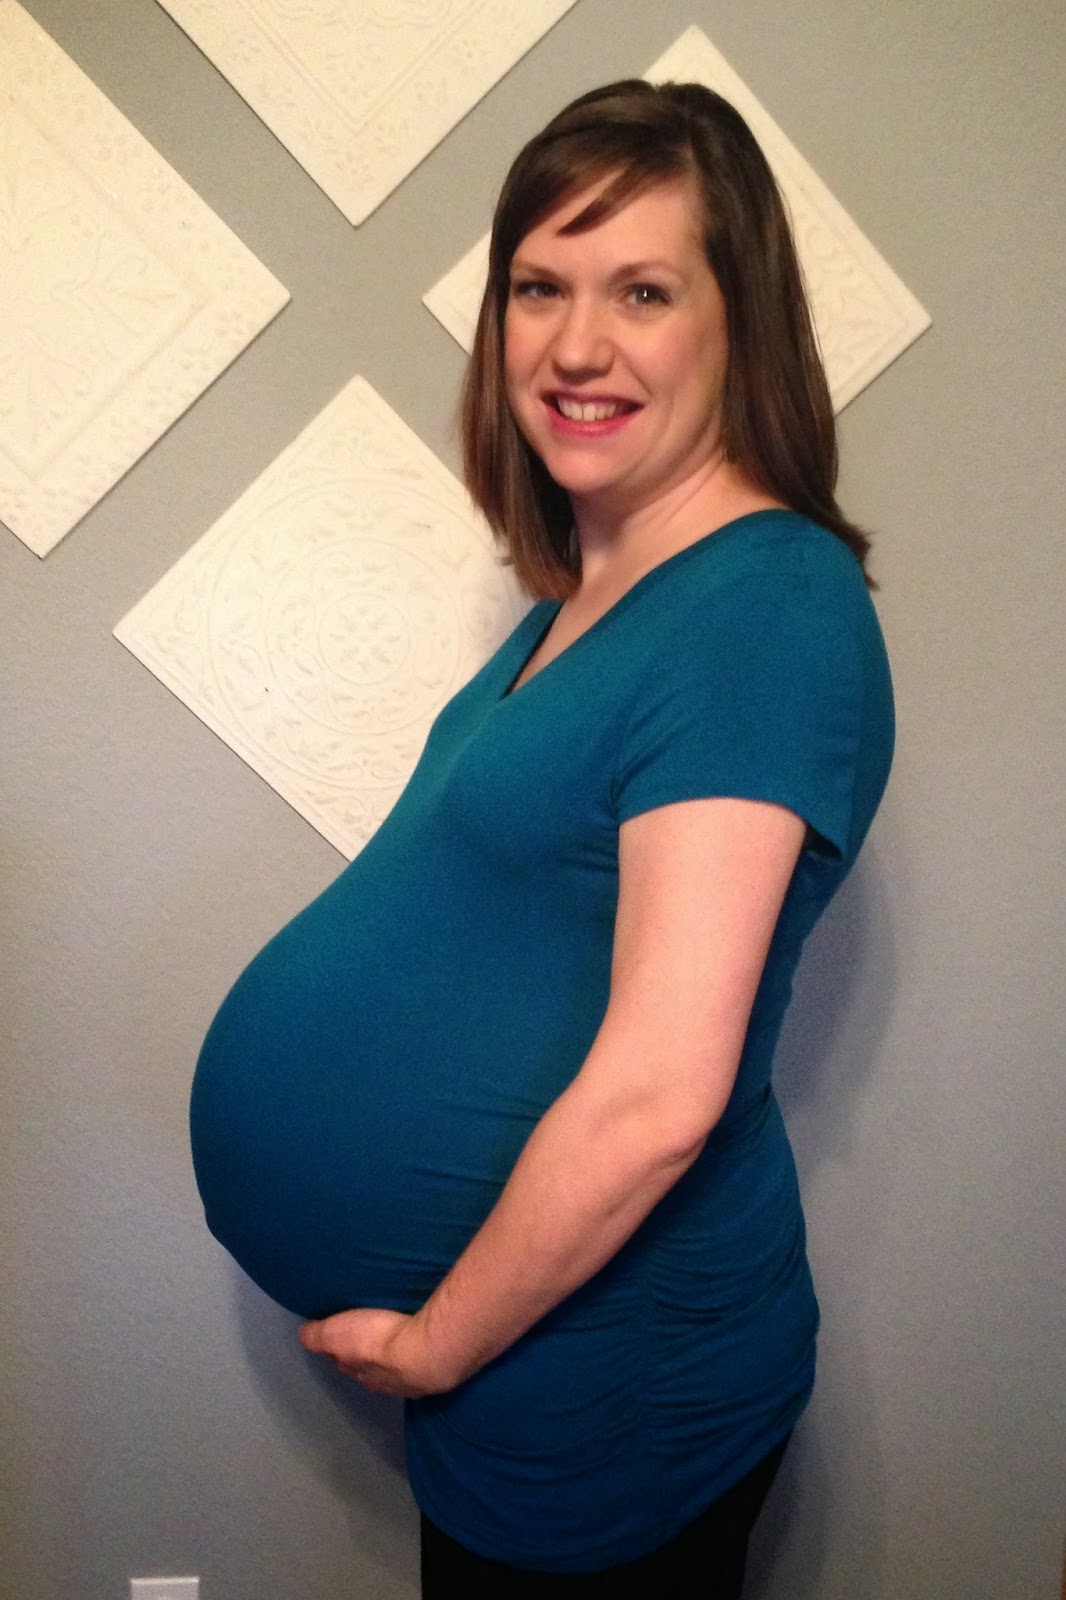 Baby Development At 38 Weeks Pregnant